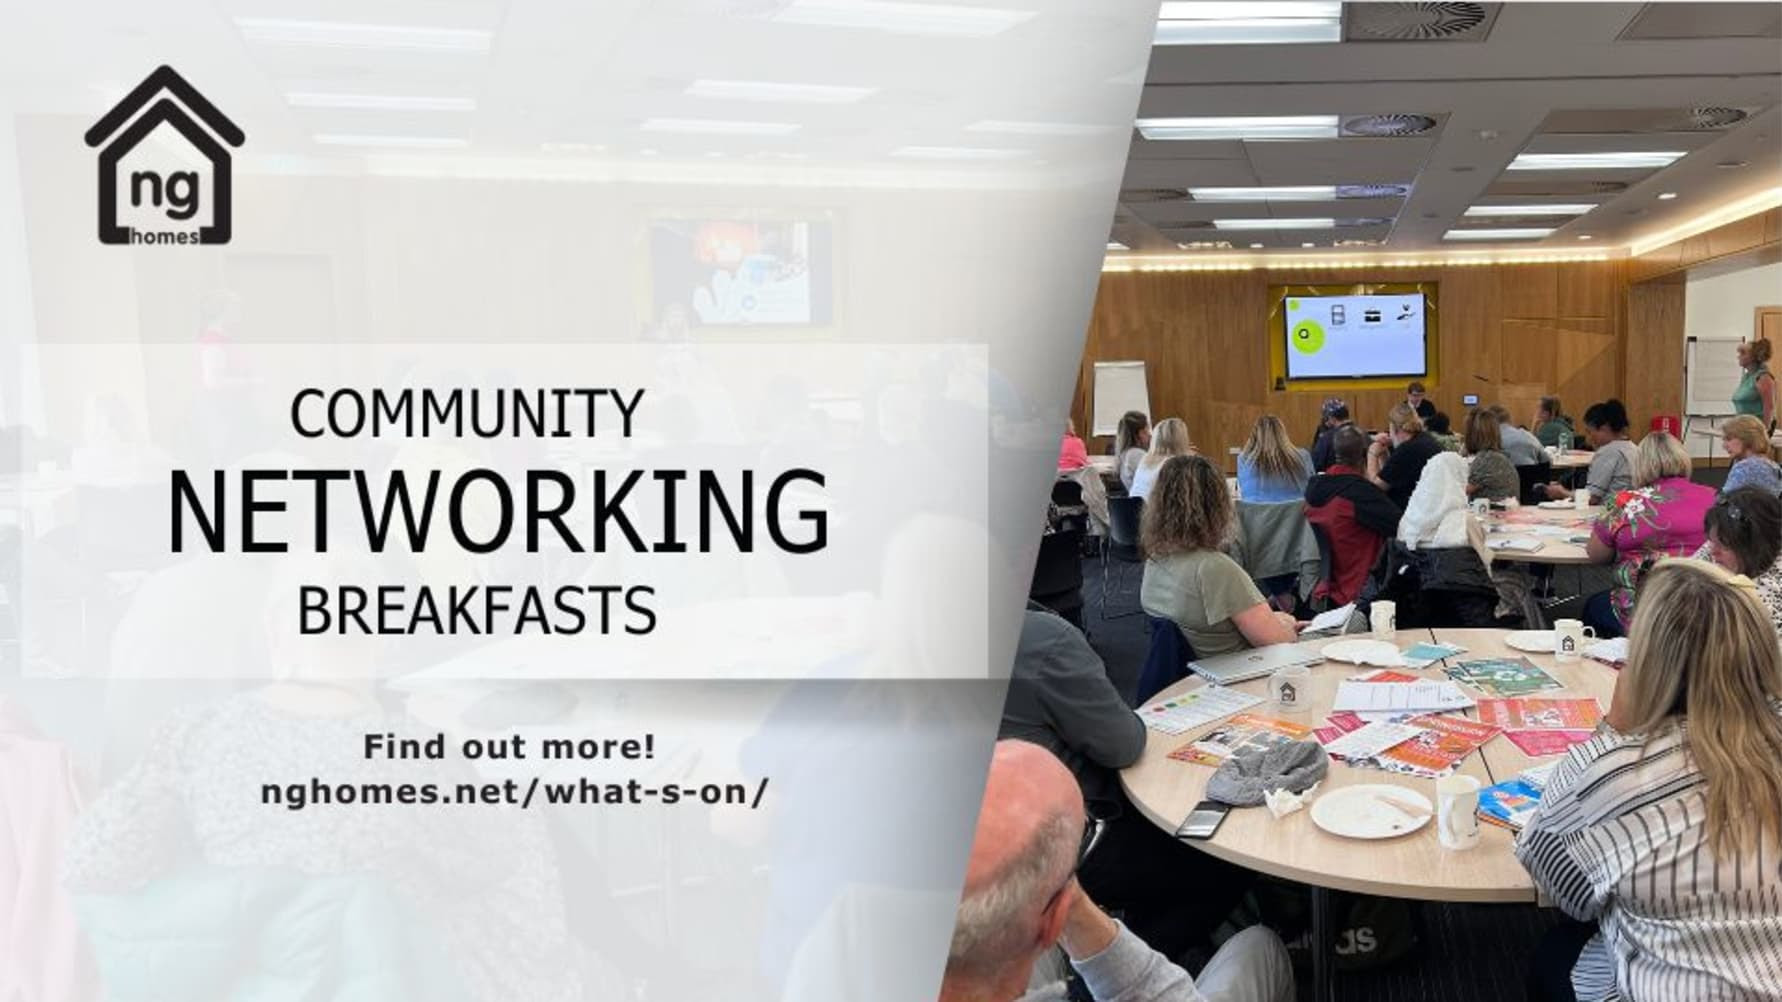 Partnership working continues to grow through ng homes' Community Networking Breakfasts